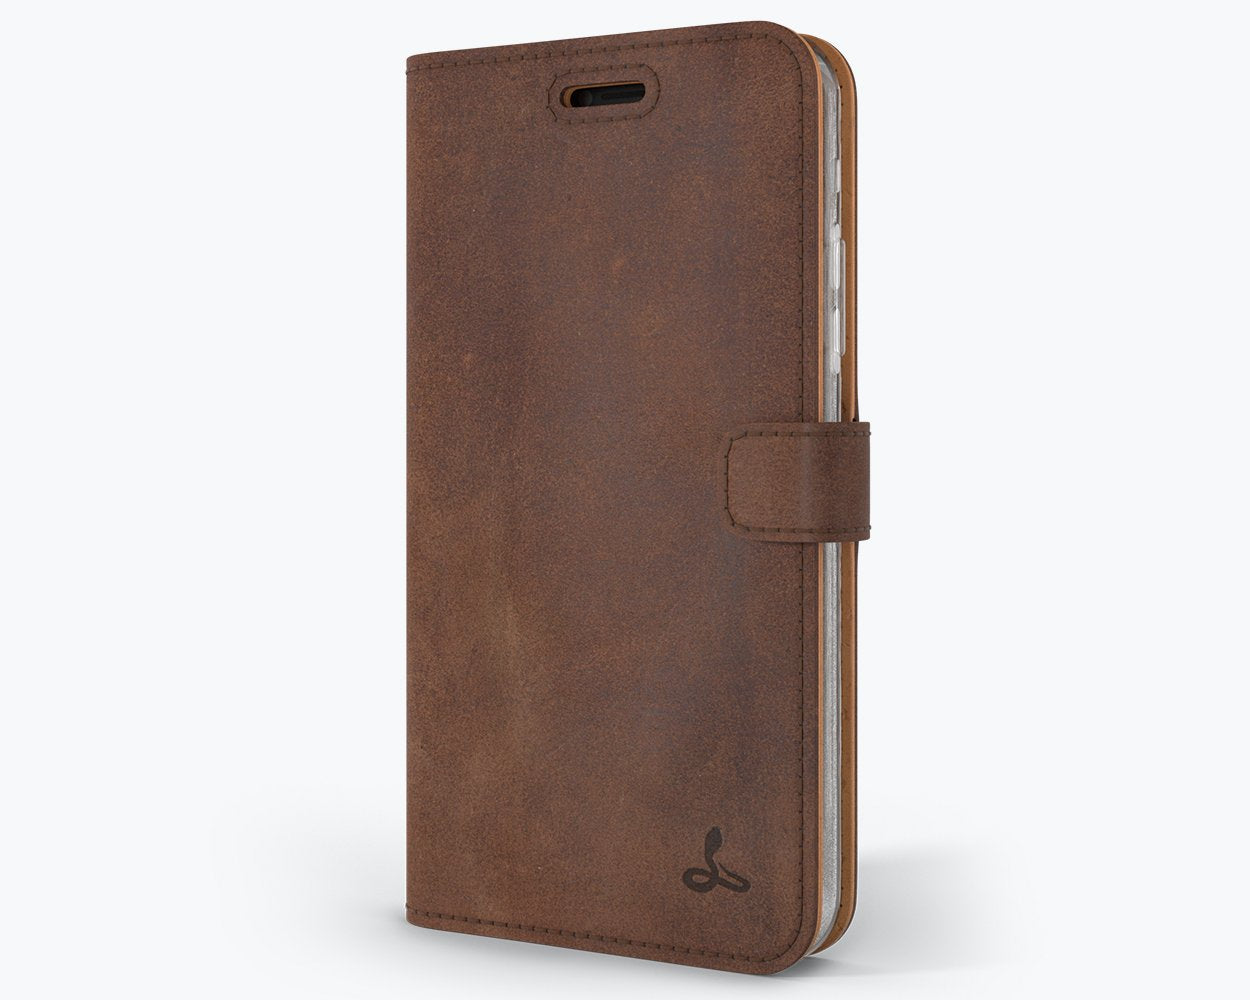 Vintage Leather Wallet - Apple iPhone X/XS